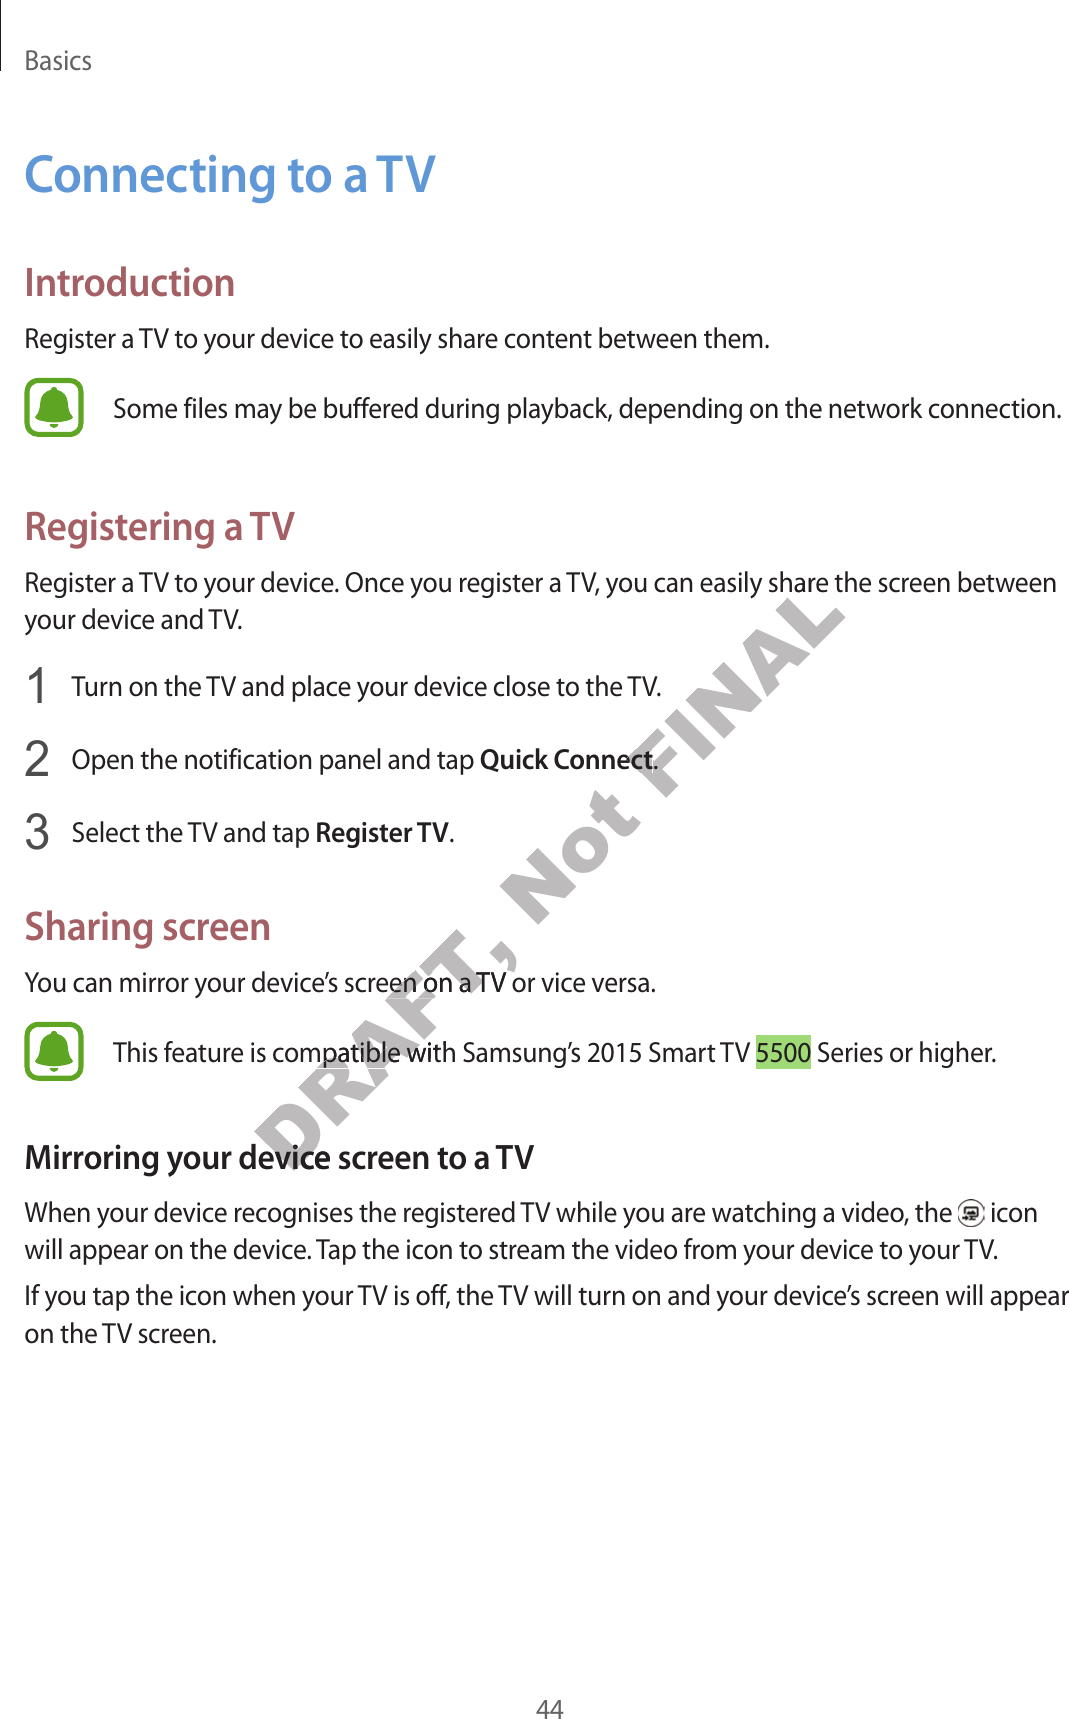 Basics44C onnecting to a TVIntroductionRegister a TV to your device to easily shar e con ten t between them.Some files may be buffer ed during pla yback, depending on the network connection.Registering a TVRegister a TV to your device. Onc e y ou r eg ister a TV, you can easily share the scr een between your device and TV.1  Turn on the TV and place your device close t o the TV.2  Open the notification panel and tap Quick Connect.3  Select the TV and tap Register TV.Sharing screenYou can mirror y our device’s screen on a TV or vice versa.This f eatur e is c ompatible with Samsung’s 2015 Smart  TV 5500 Series or higher.Mirroring your de vic e screen t o a TVWhen your devic e r ecog nises the r eg ister ed TV while you are wat ching a video, the   icon will appear on the device . Tap the icon to str eam the video fr om y our device t o y our TV.If you tap the icon when your TV is off , the TV will turn on and your device’s screen will appear on the TV screen.DRAFT, You can mirror y our device’s screen on a TV or vice versa.DRAFT, You can mirror y our device’s screen on a TV or vice versa.DRAFT, This f eatur e is c ompatible with Samsung’s 2015 Smart  TV DRAFT, This f eatur e is c ompatible with Samsung’s 2015 Smart  TV Mirroring your de vic e screen t o a TVDRAFT, Mirroring your de vic e screen t o a TVNot FINALRegister a TV to your device. Onc e y ou r eg ister a TV, you can easily share the scr een between FINALRegister a TV to your device. Onc e y ou r eg ister a TV, you can easily share the scr een between Quick ConnectFINALQuick Connect.FINAL.